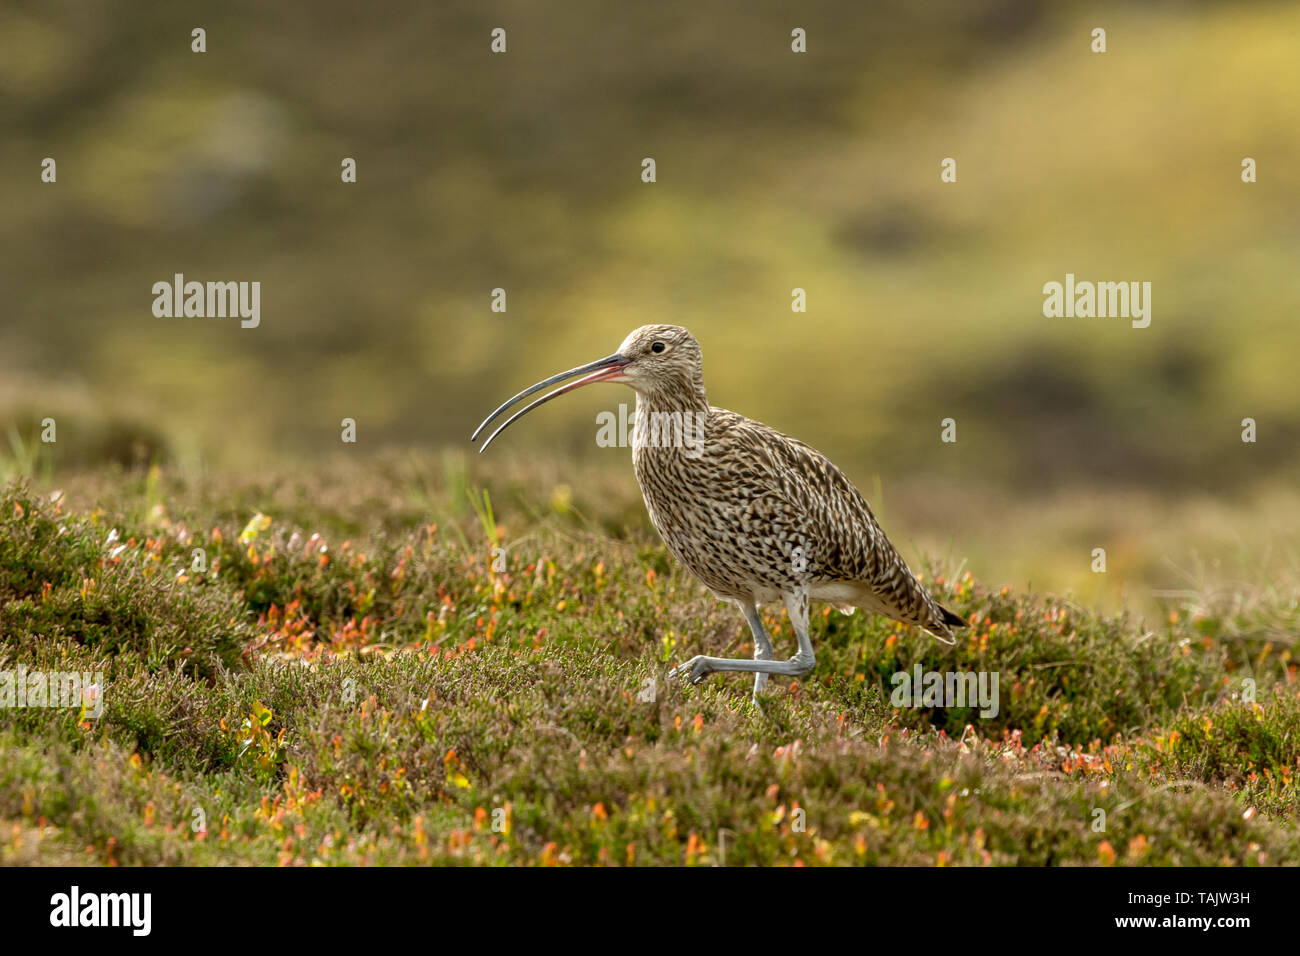 Curlew, adult Eurasian curlew in natural moorland habitat during  the nesting season.  Yorkshire Dales, England.  Landscape, space for copy. Stock Photo